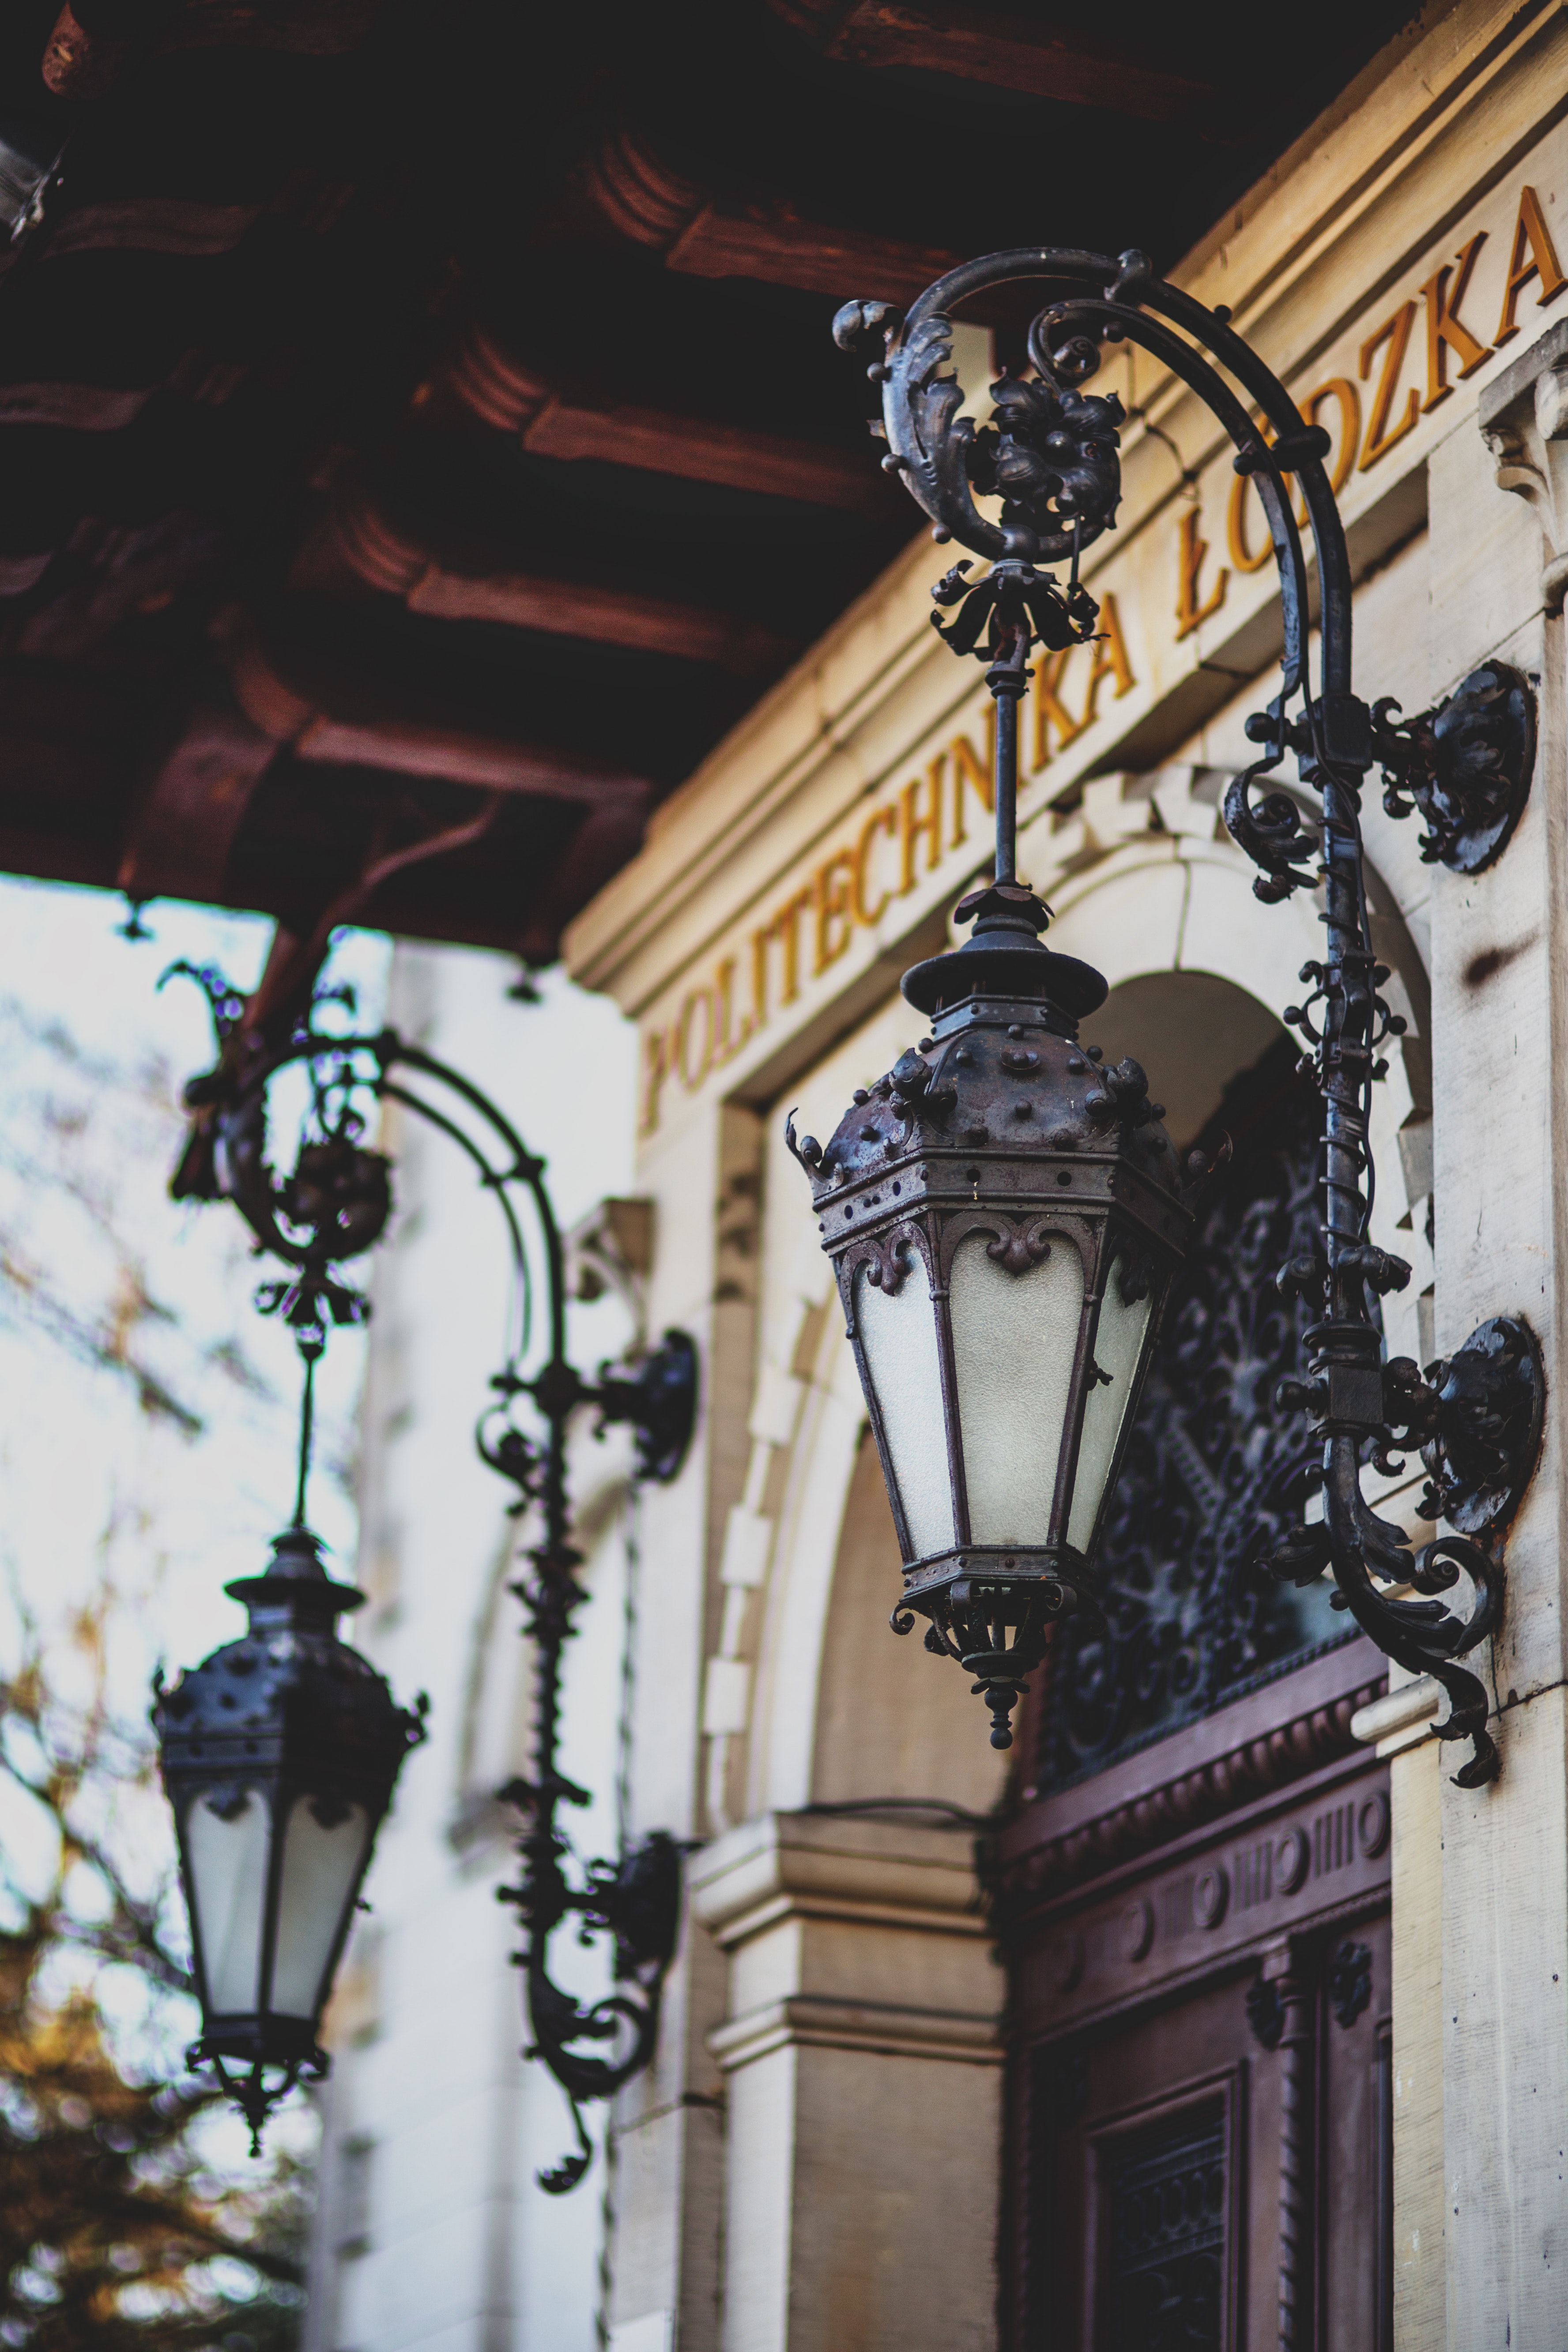 Old lamp, Ornate, Travel, Town, Tourism, HQ Photo